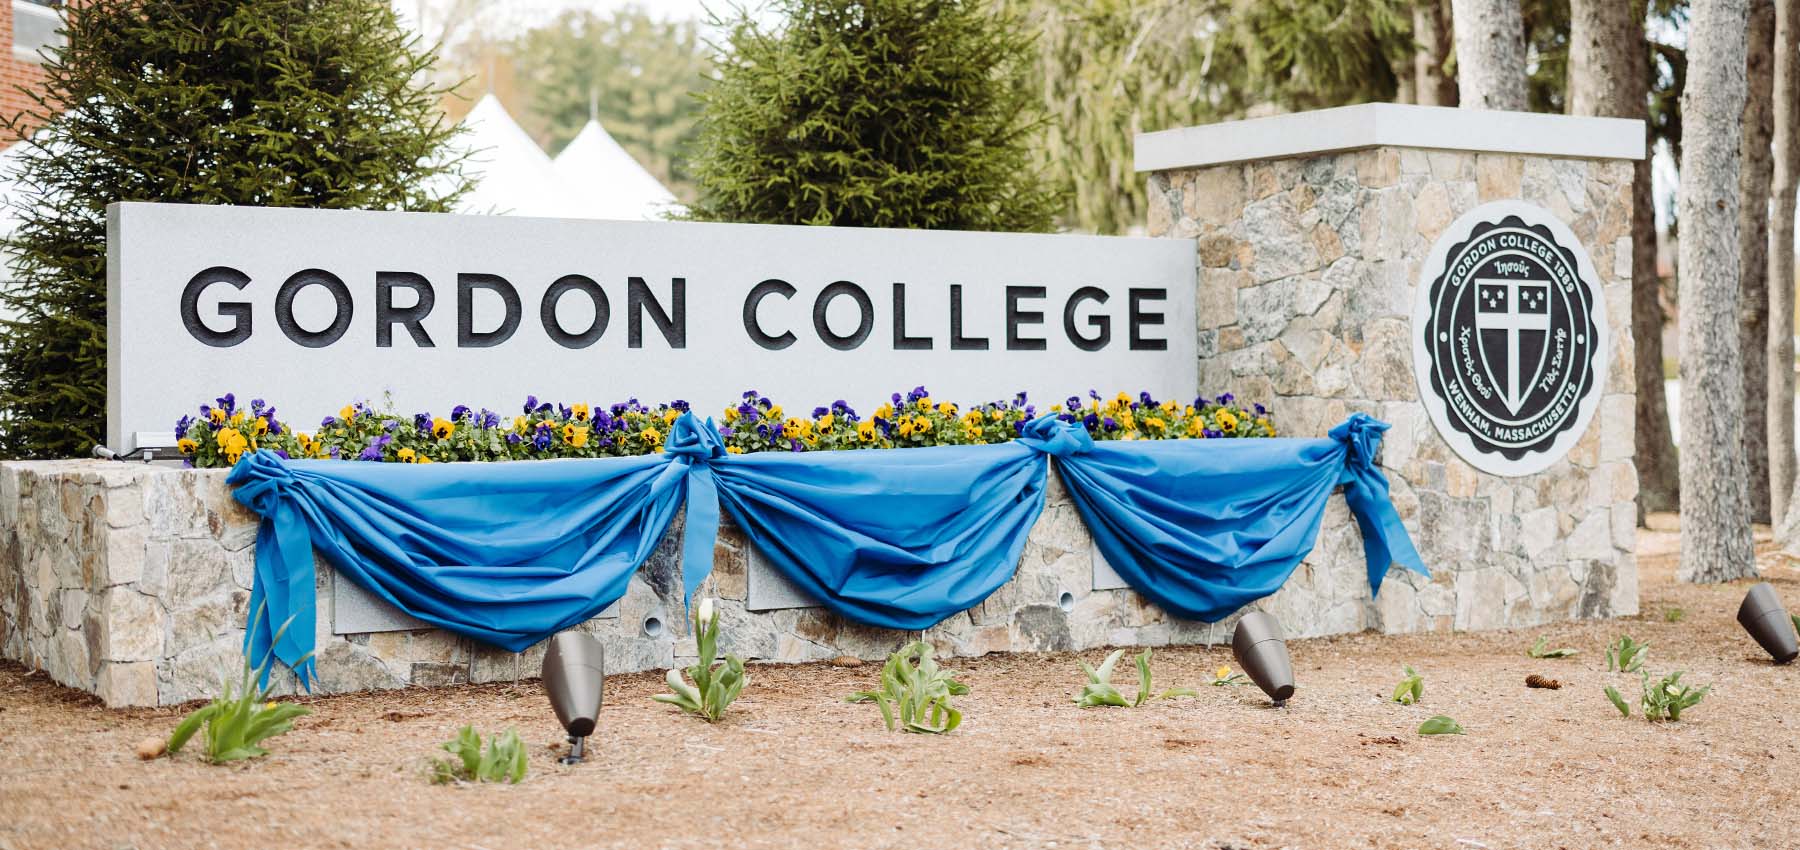 Gordon College entrance on inauguration day